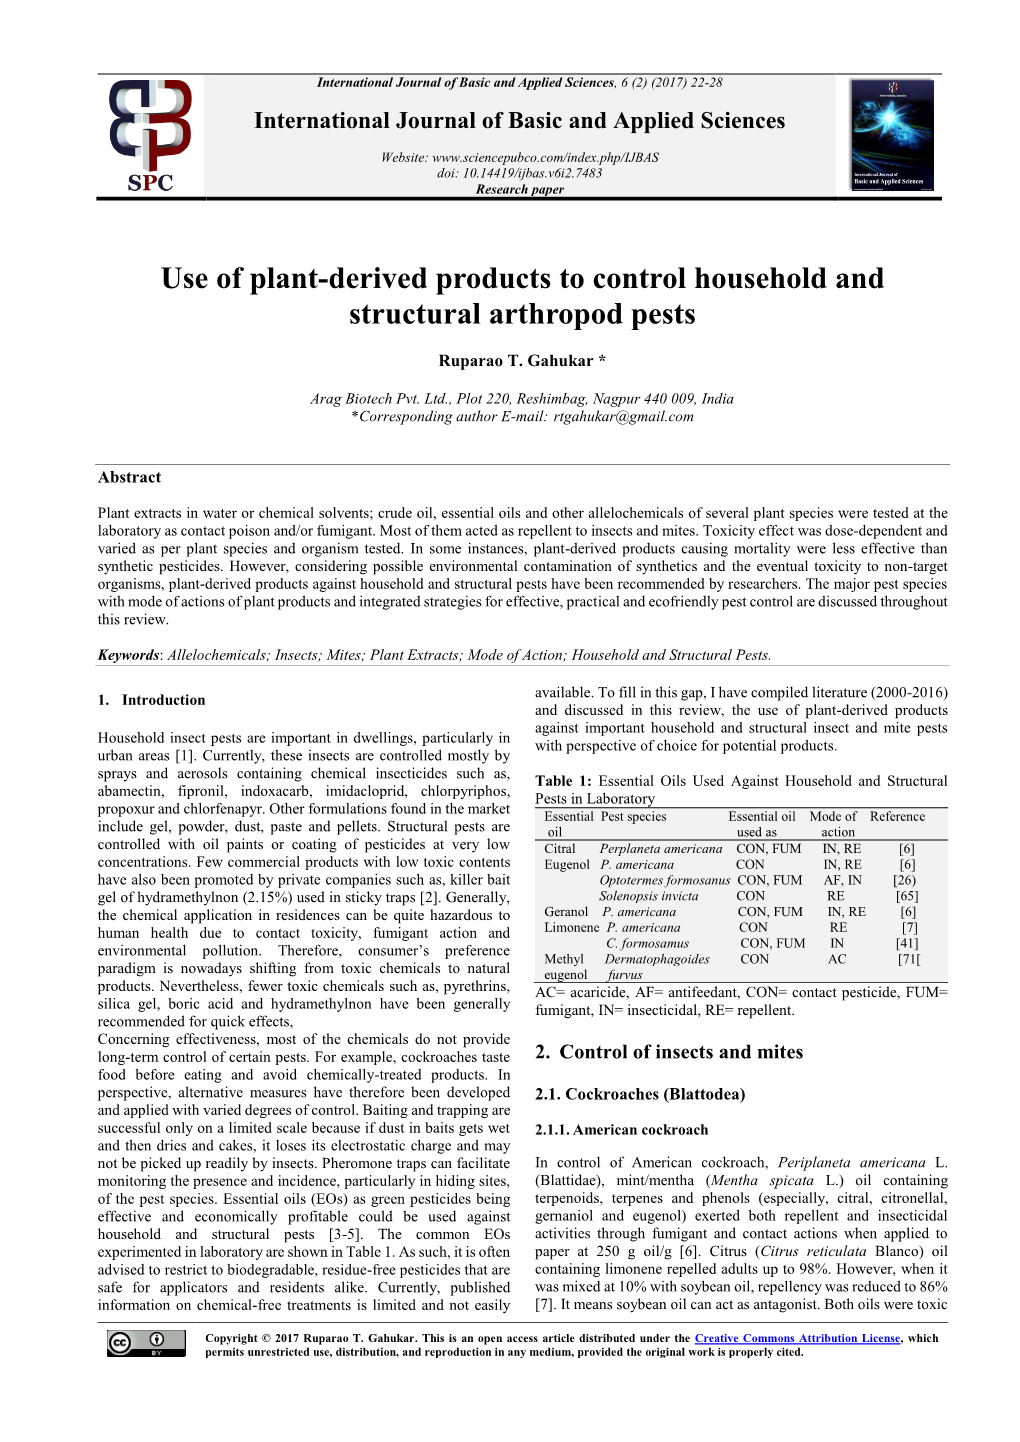 Use of Plant-Derived Products to Control Household and Structural Arthropod Pests